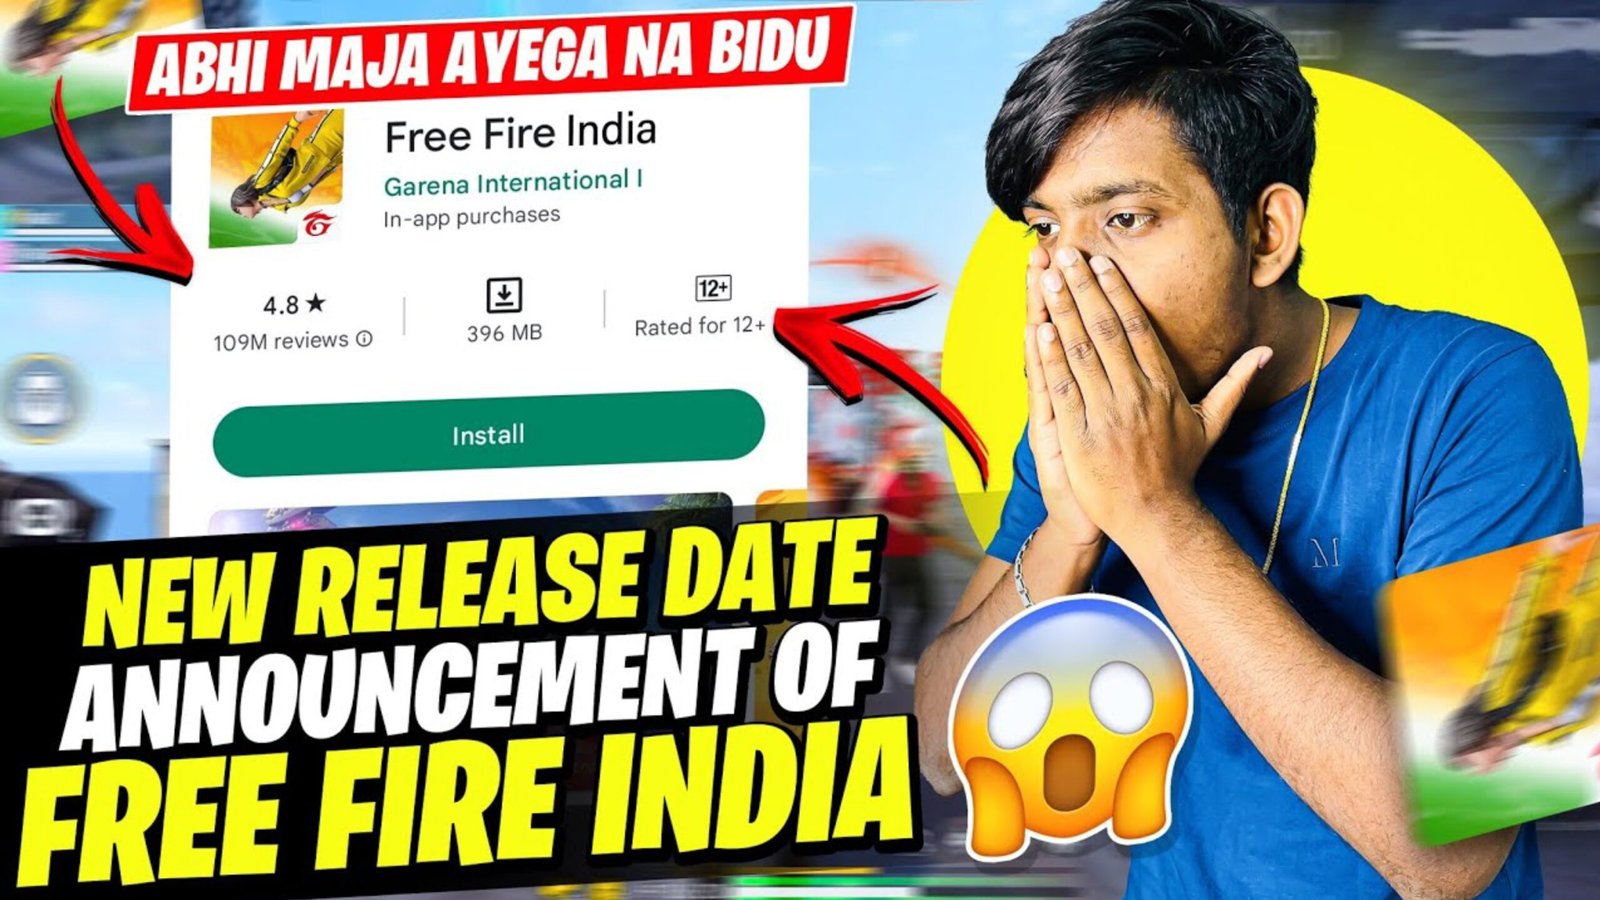 Free fire launch in india